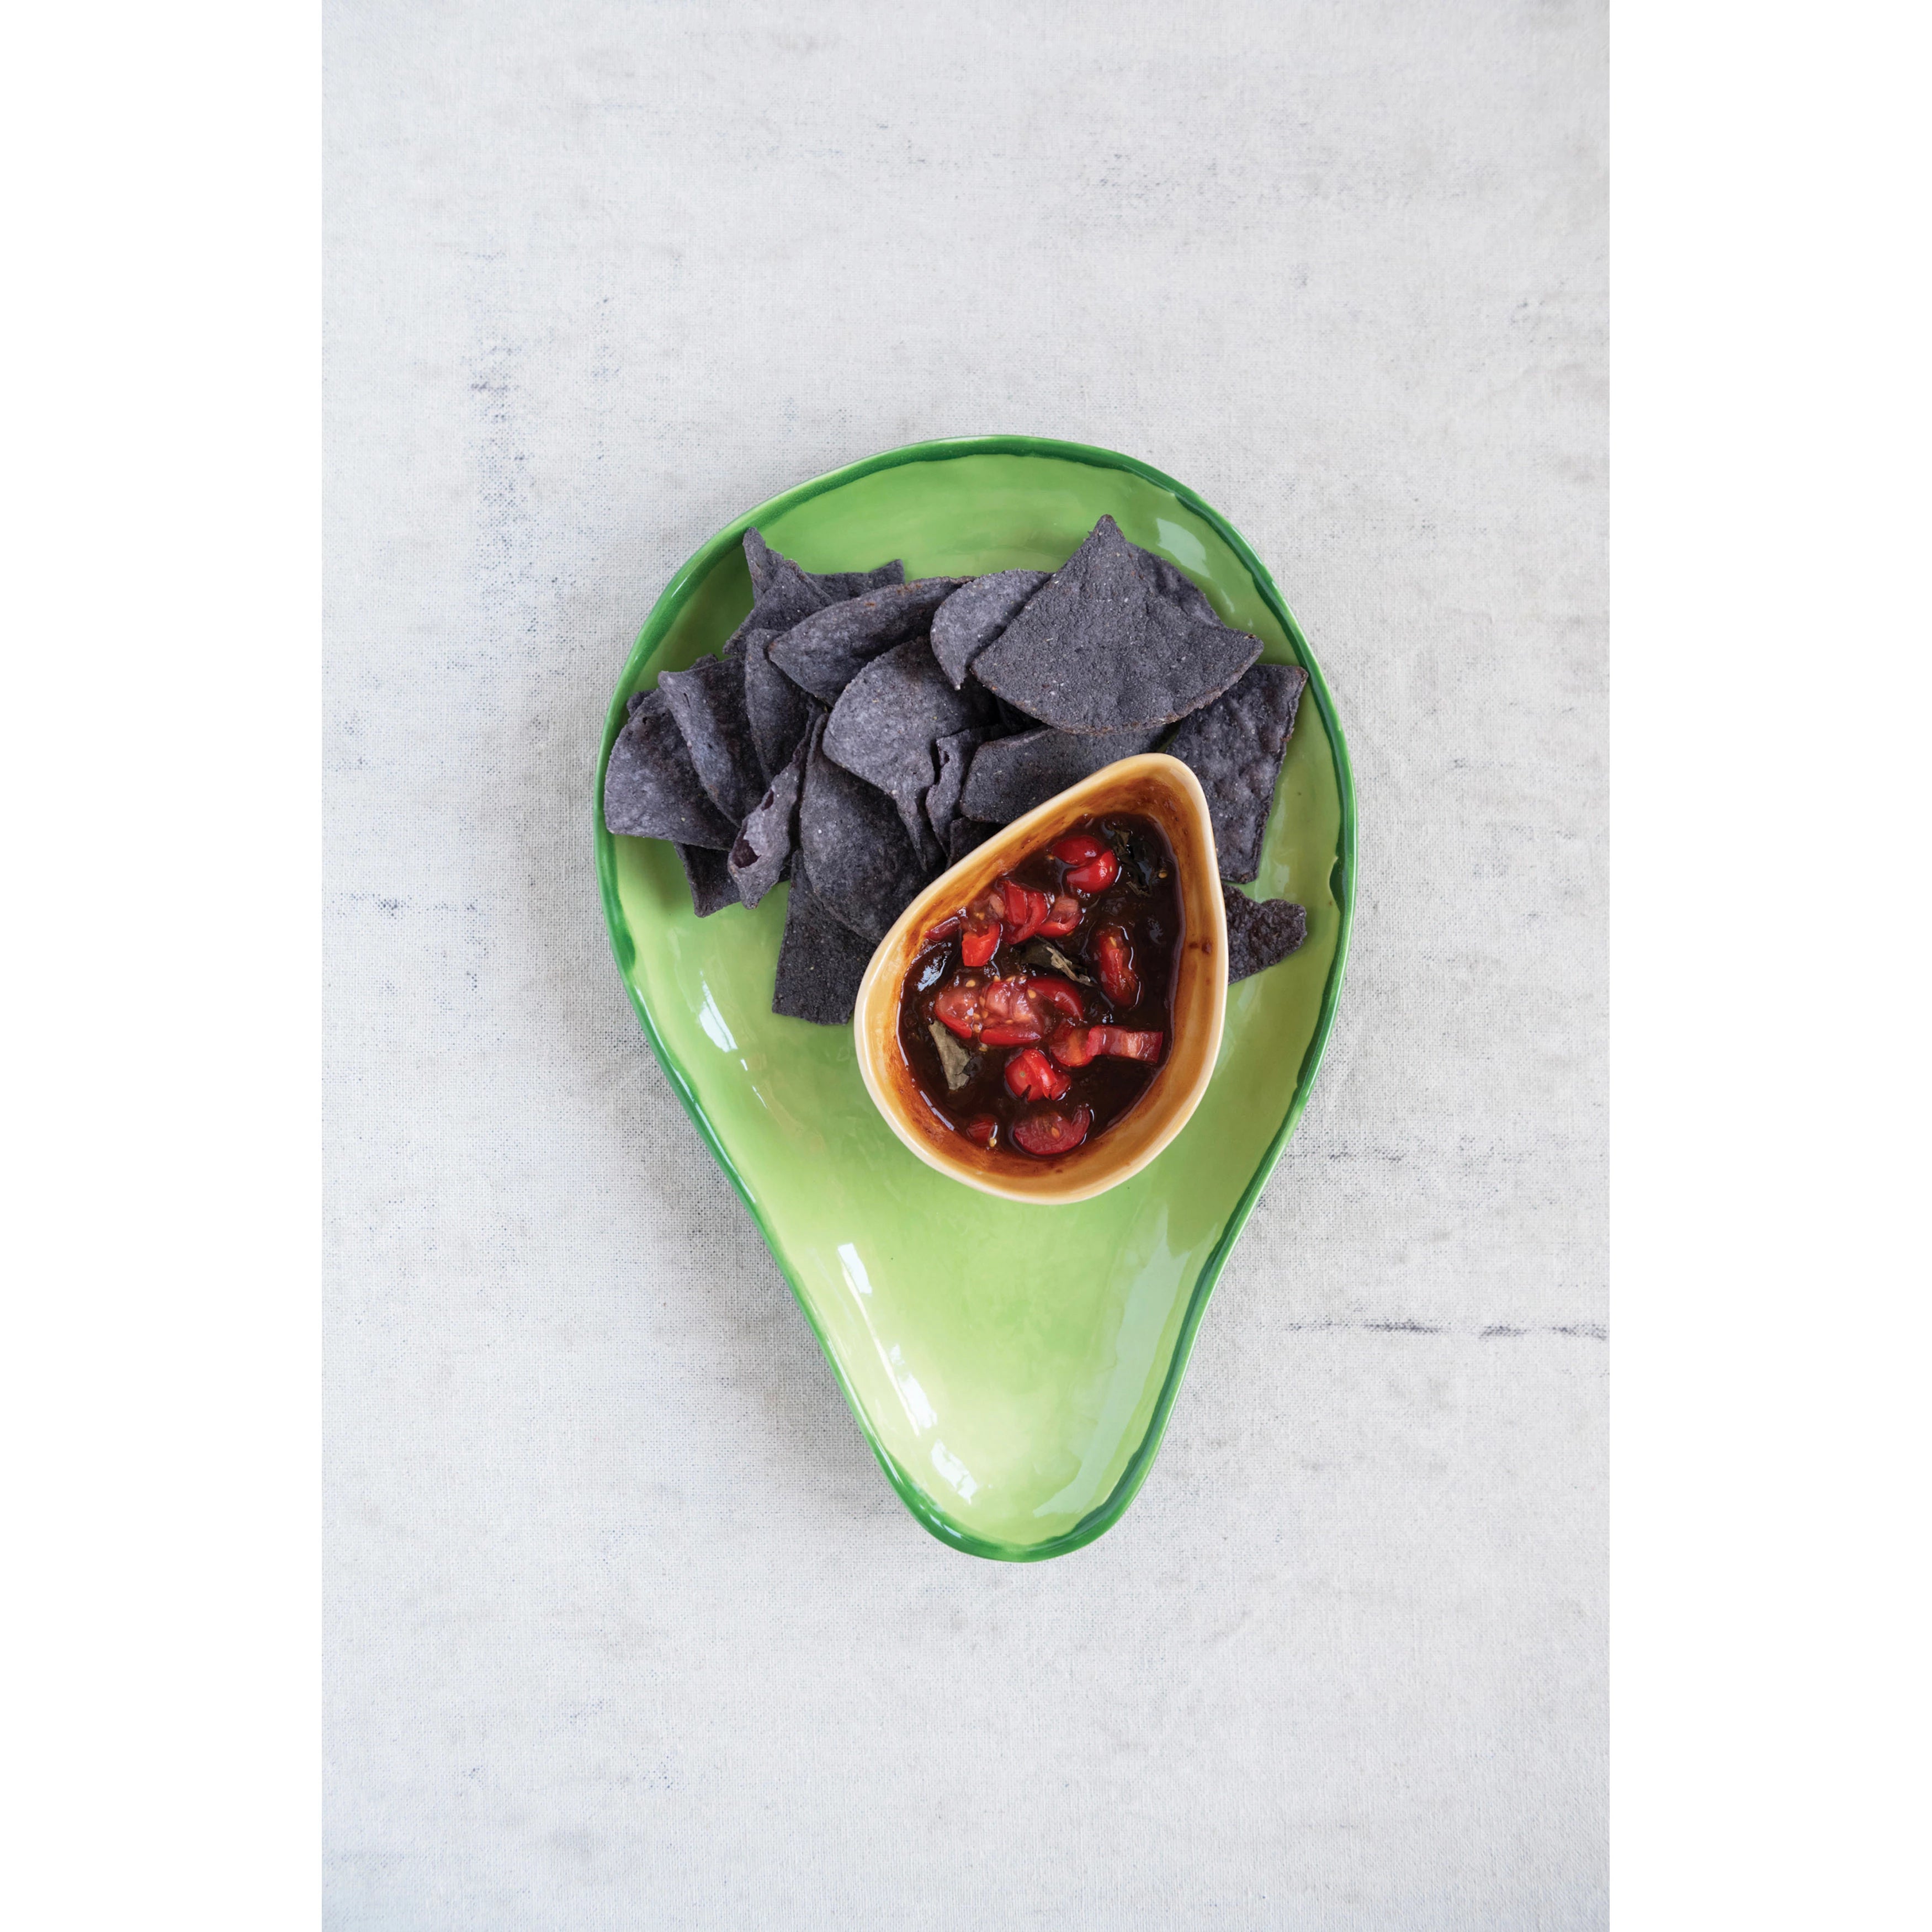 Stoneware Avocado Plate with Pit Bowl